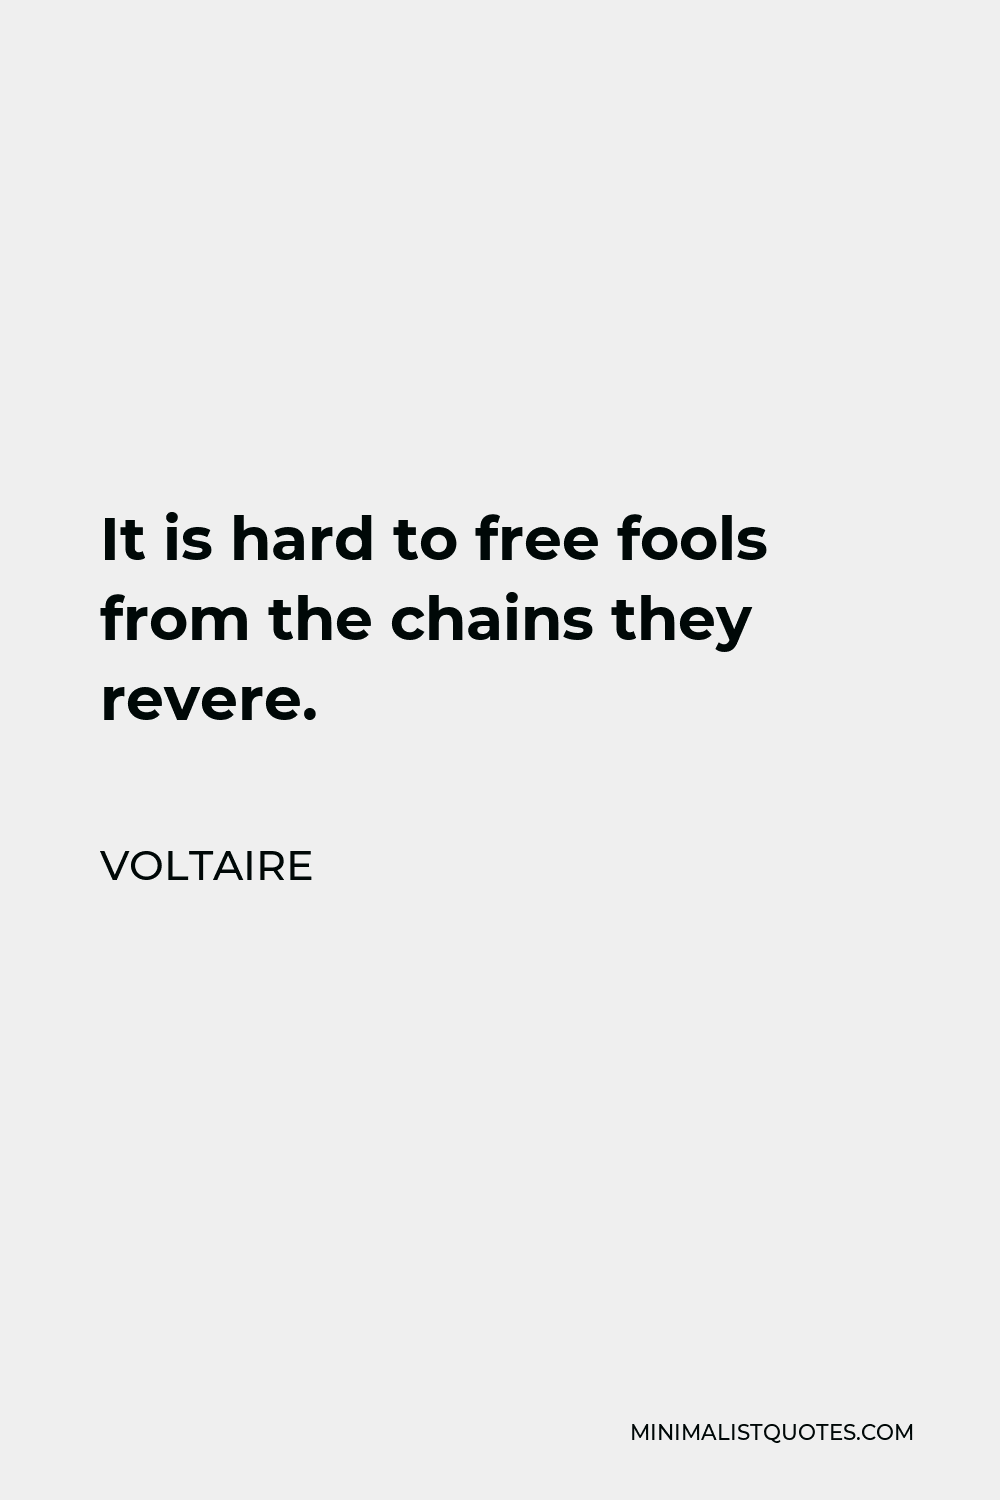 Voltaire Quote - It is hard to free fools from the chains they revere.